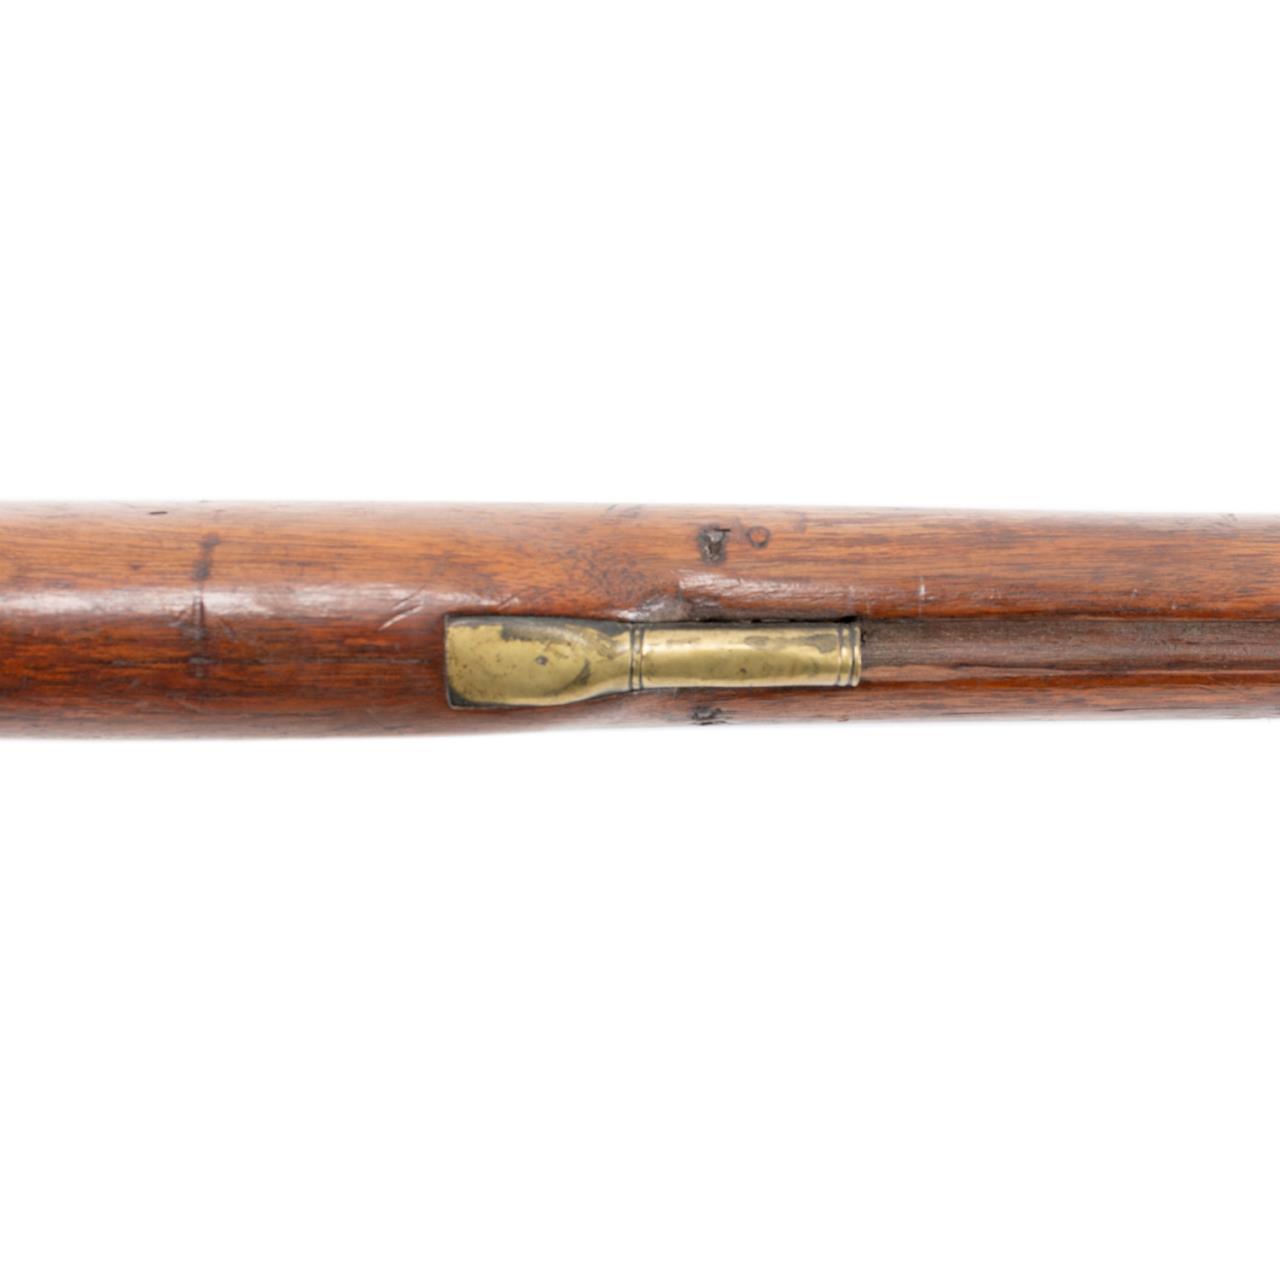 Kentucky style percussion rifle ... true antique and beautiful to display